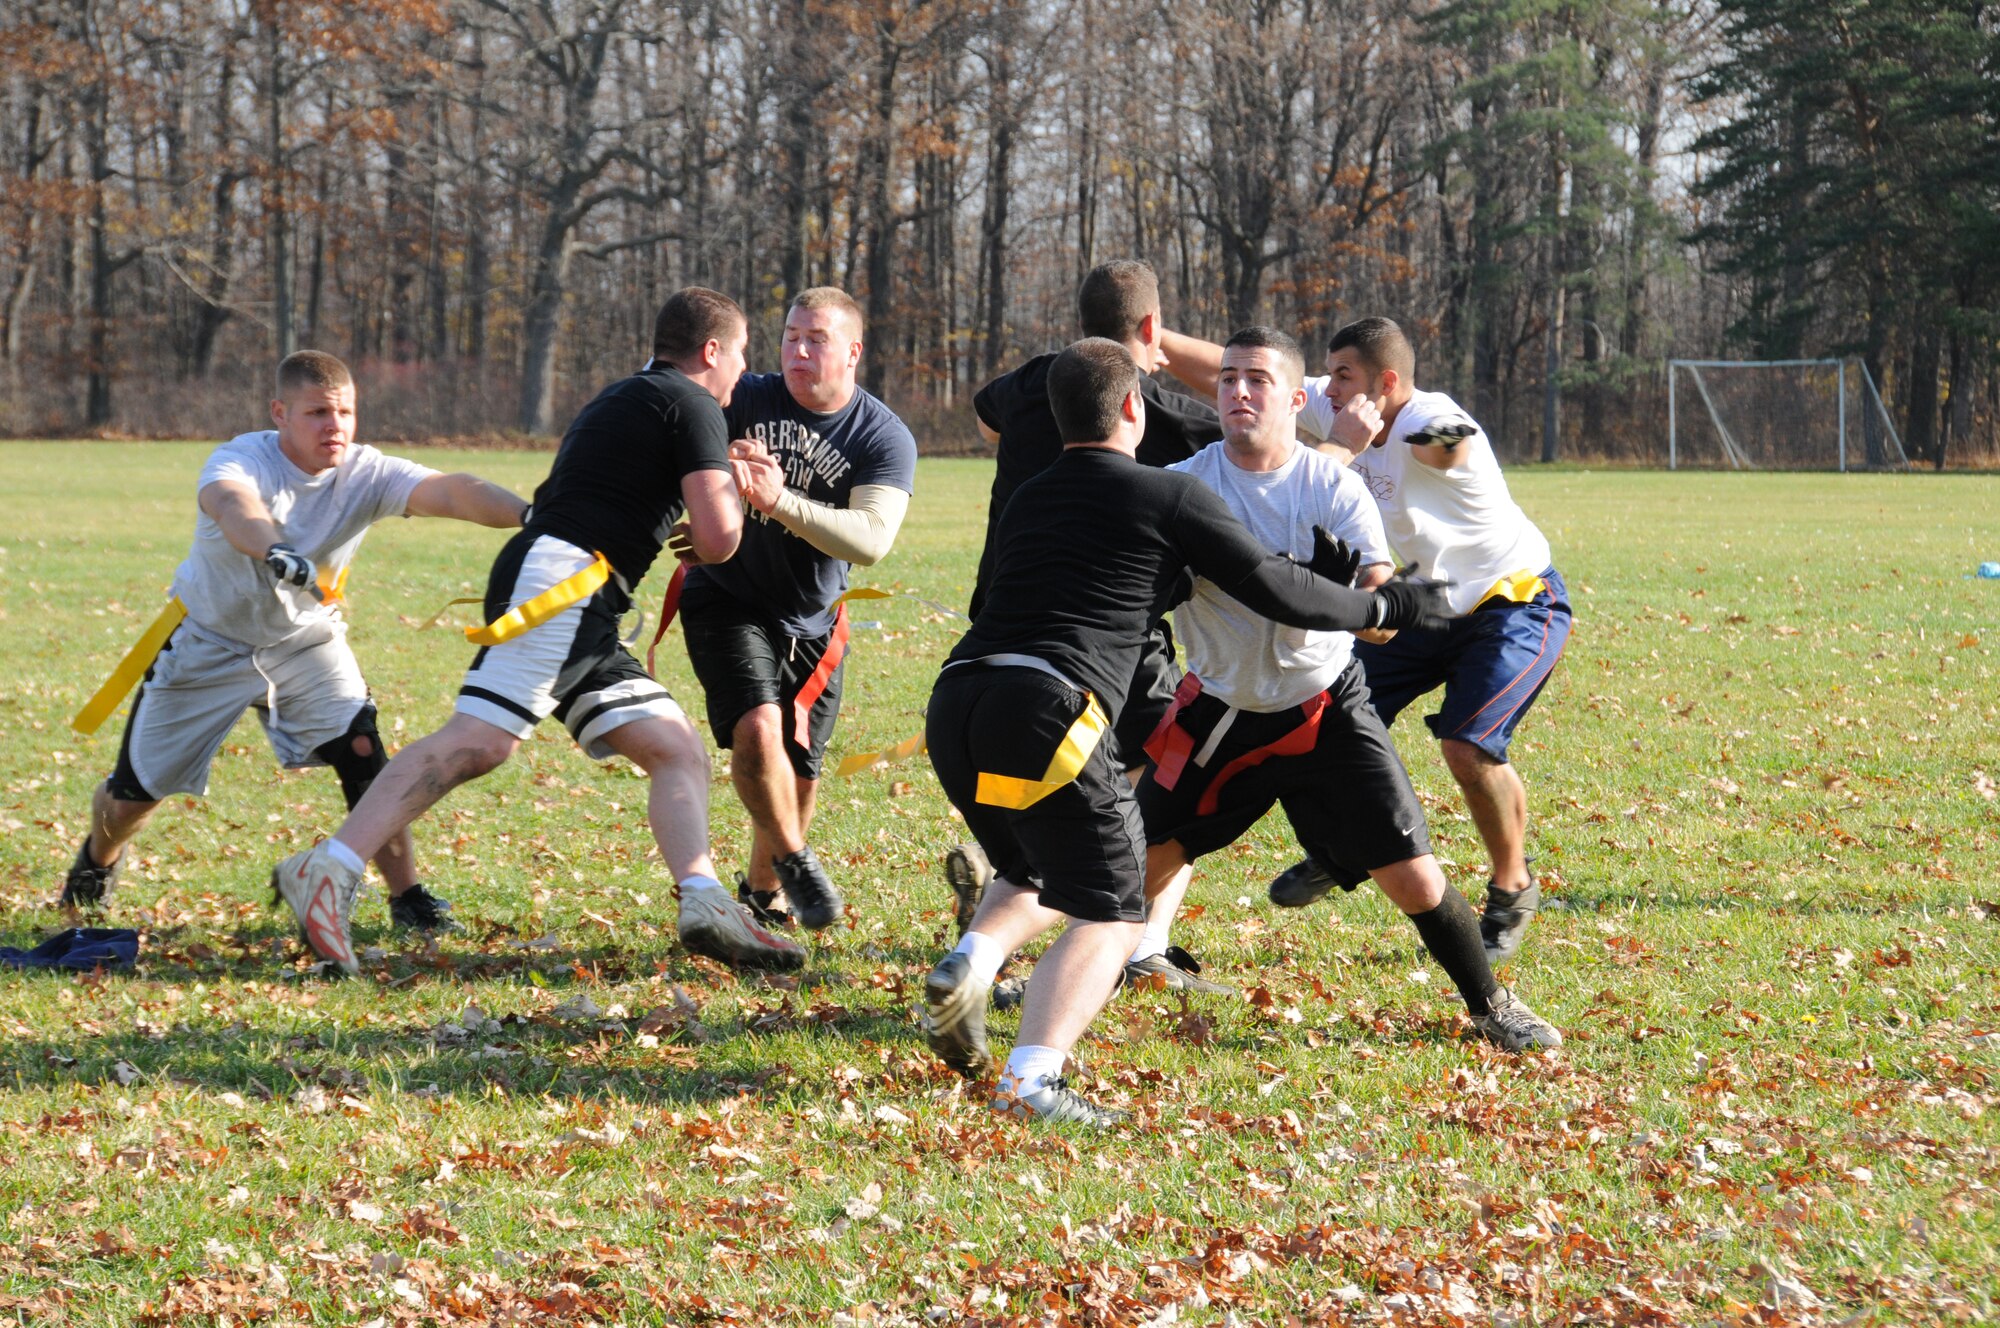 107th Airlift Wing, Security Force members hold their own against the U.S. Coast Guard, Cleveland Station, Ohio. Both teams came ready to play for a worthy cause. The first Toys for Tots Flag Football tournament was recently held at Fort Niagara State Park. U.S. Air Force photo/Senior Airman Peter Dean